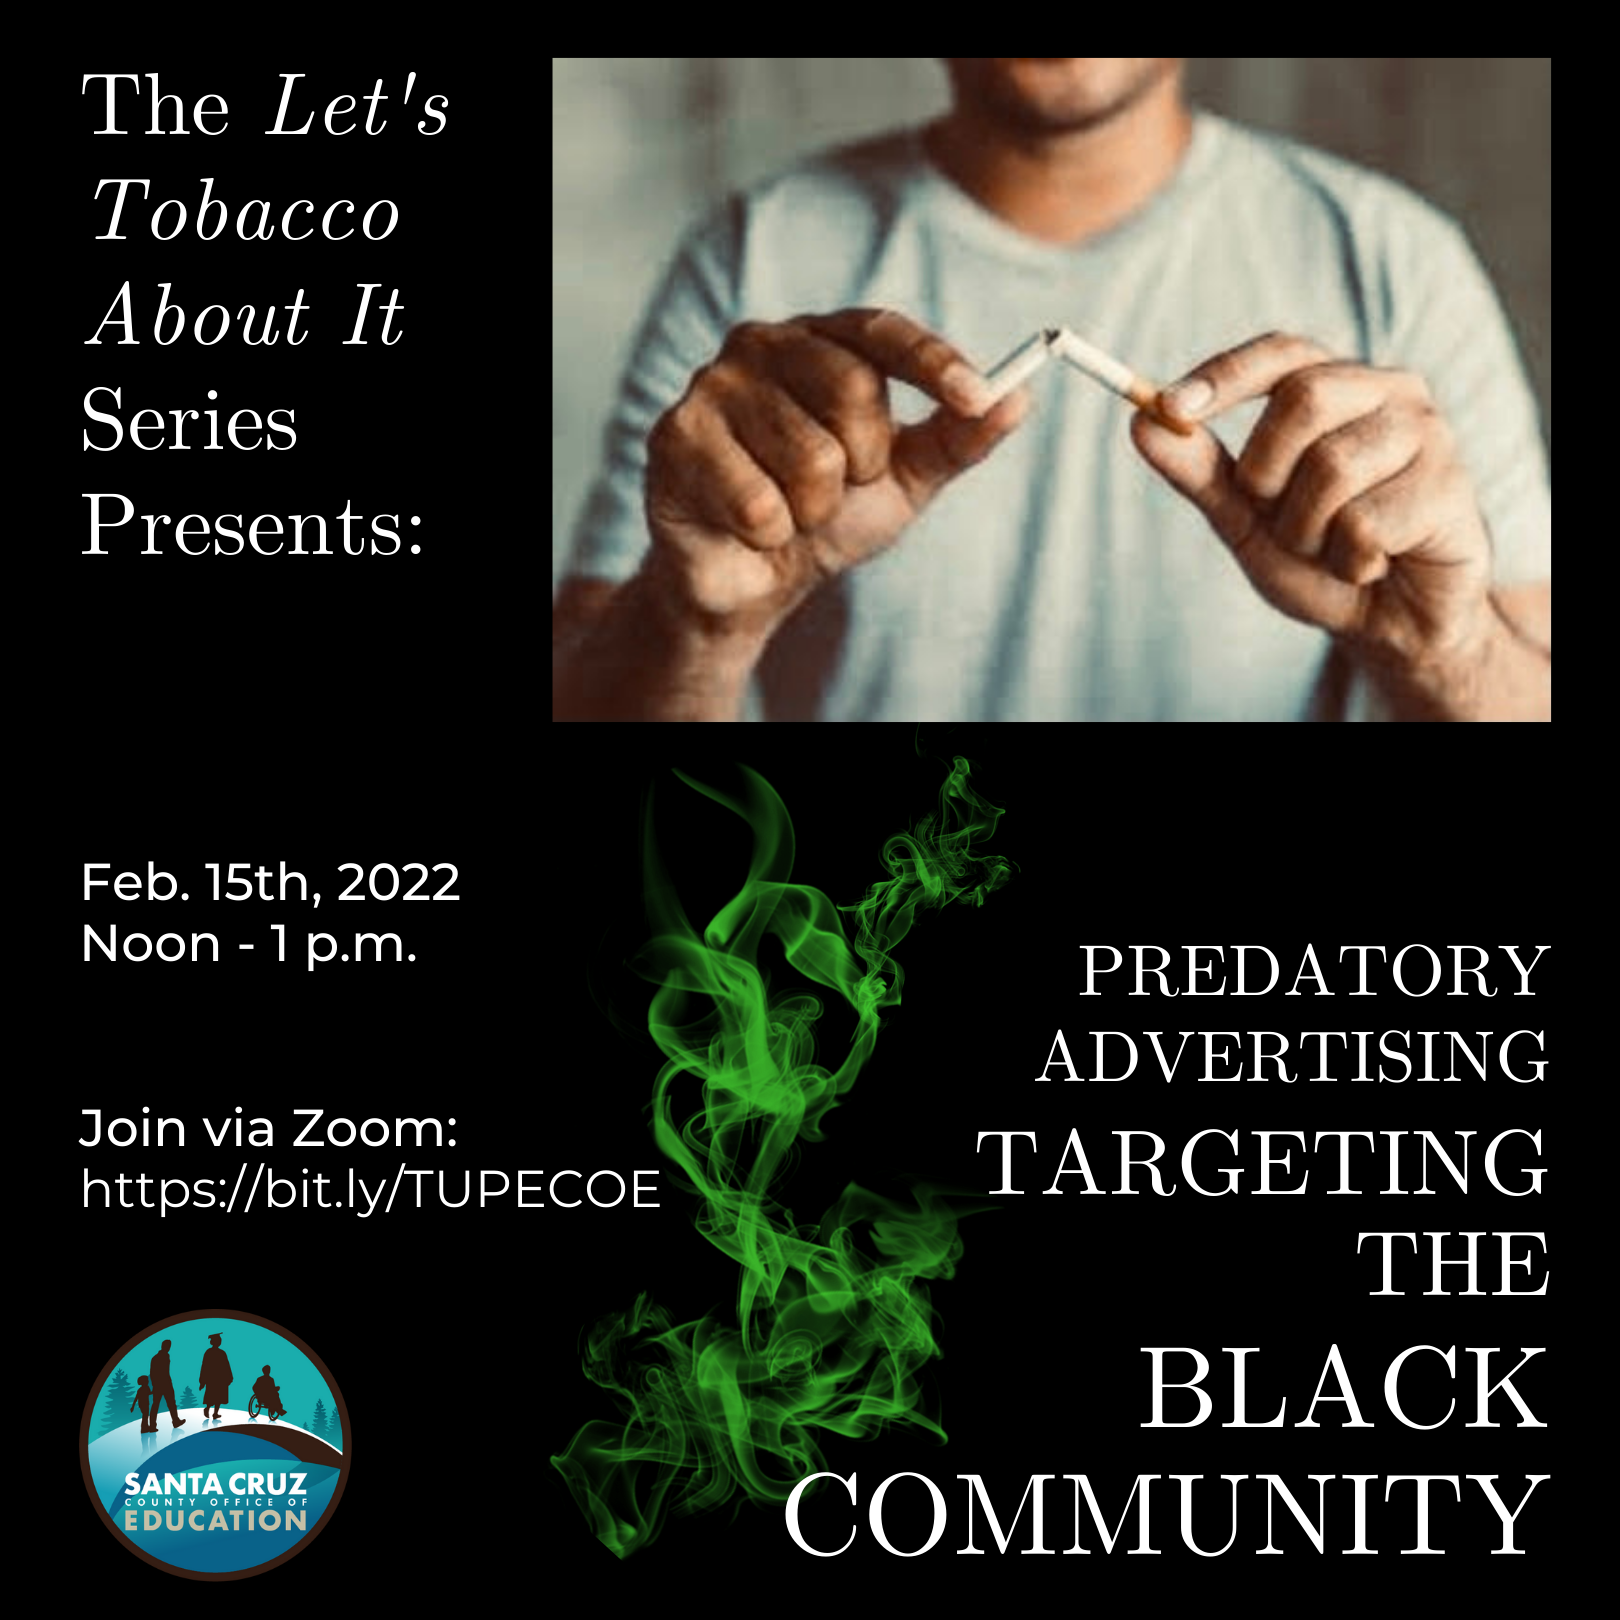 Let's Tobacco About It - Feb. 14